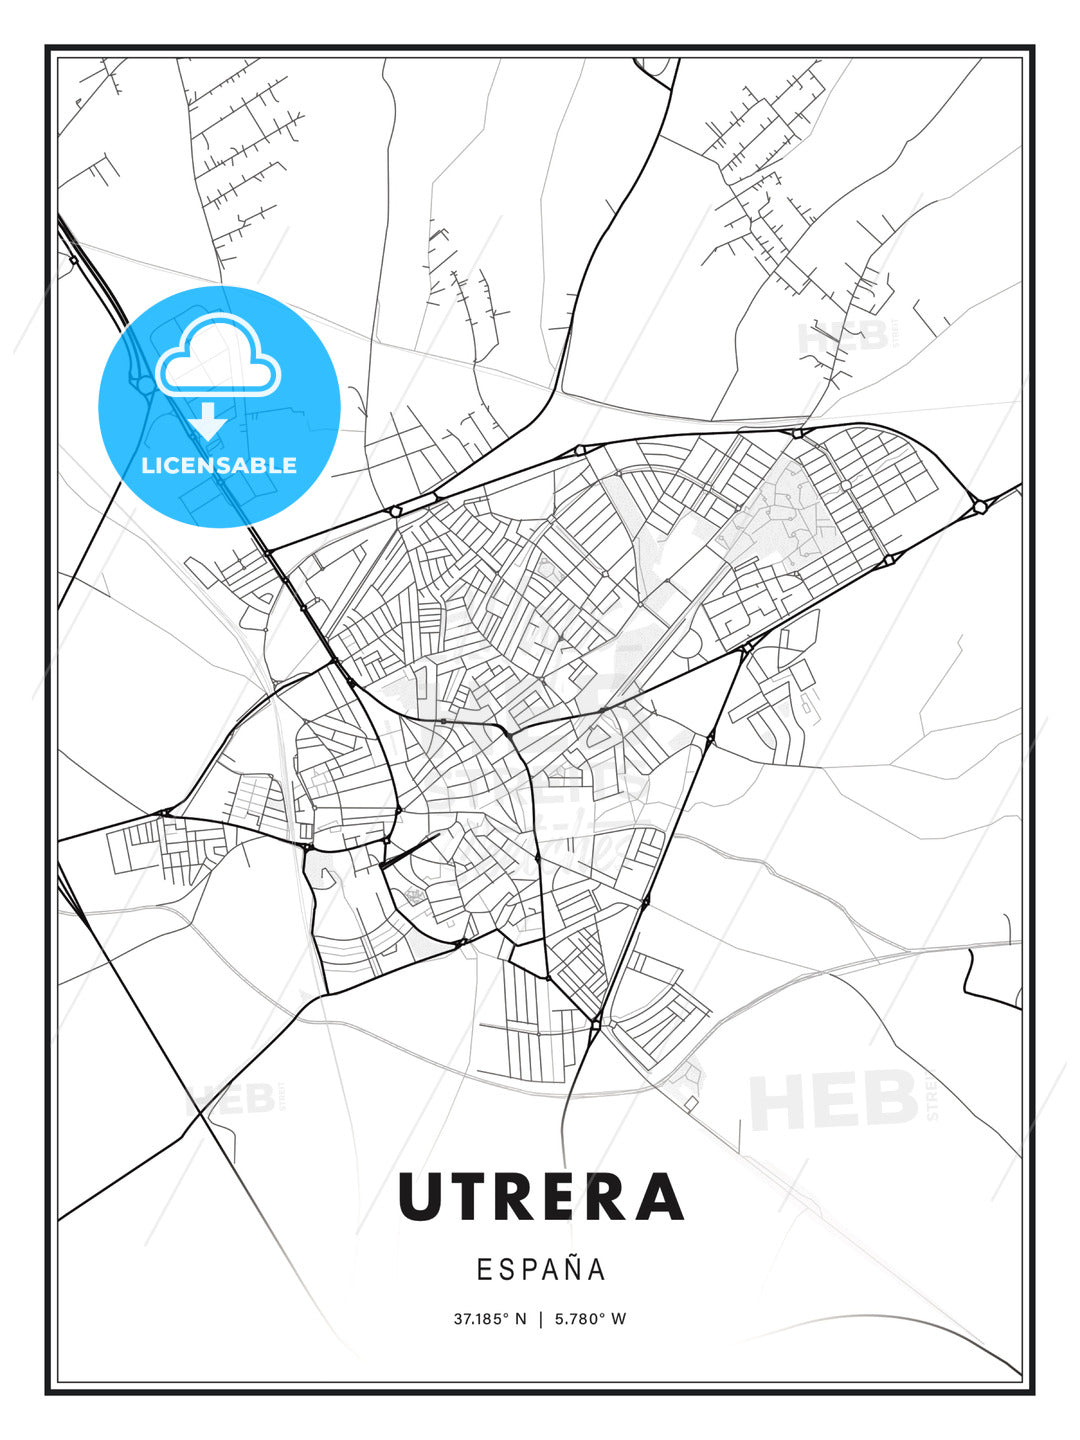 Utrera, Spain, Modern Print Template in Various Formats - HEBSTREITS Sketches